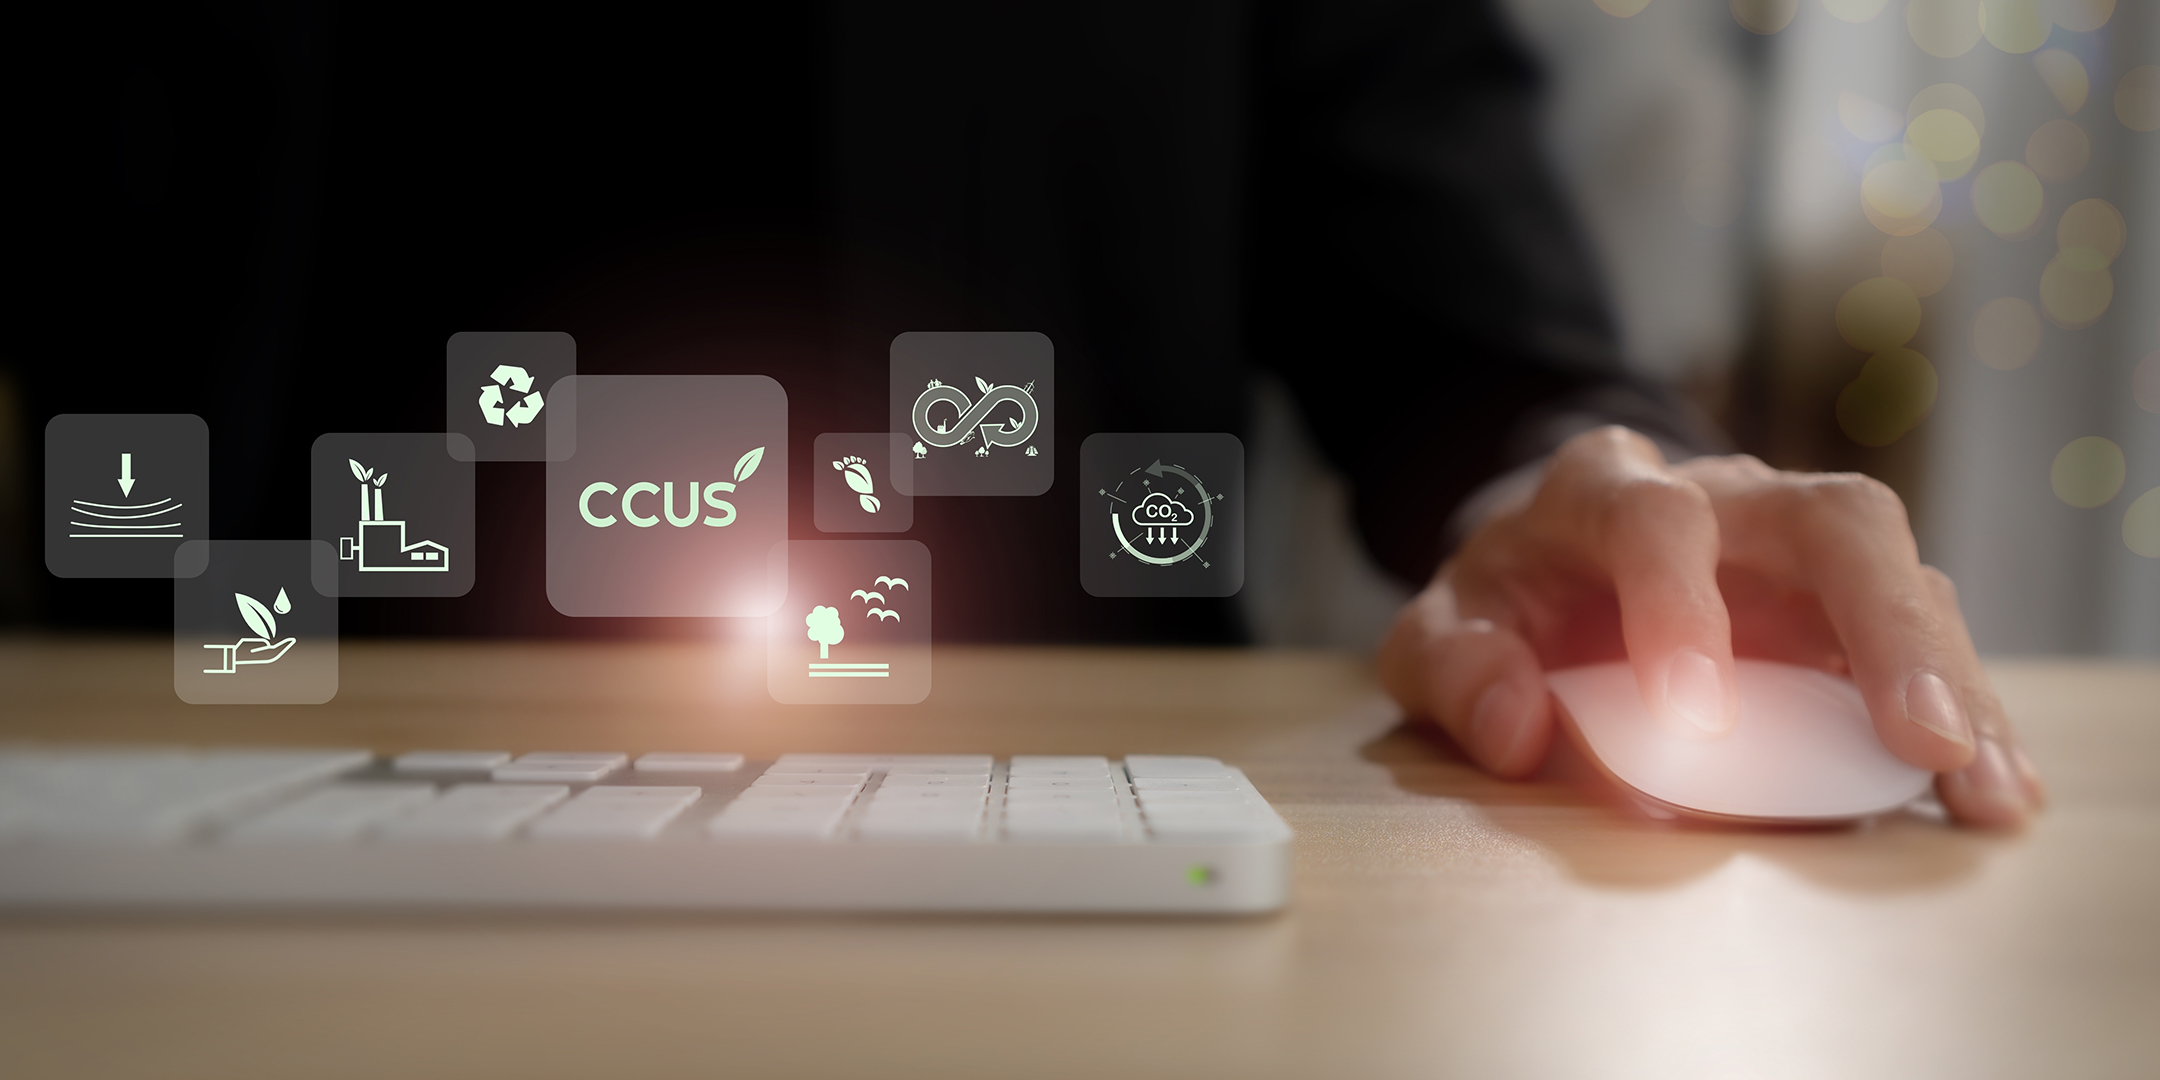 Stock image of man at keyboard with CCUS graphic